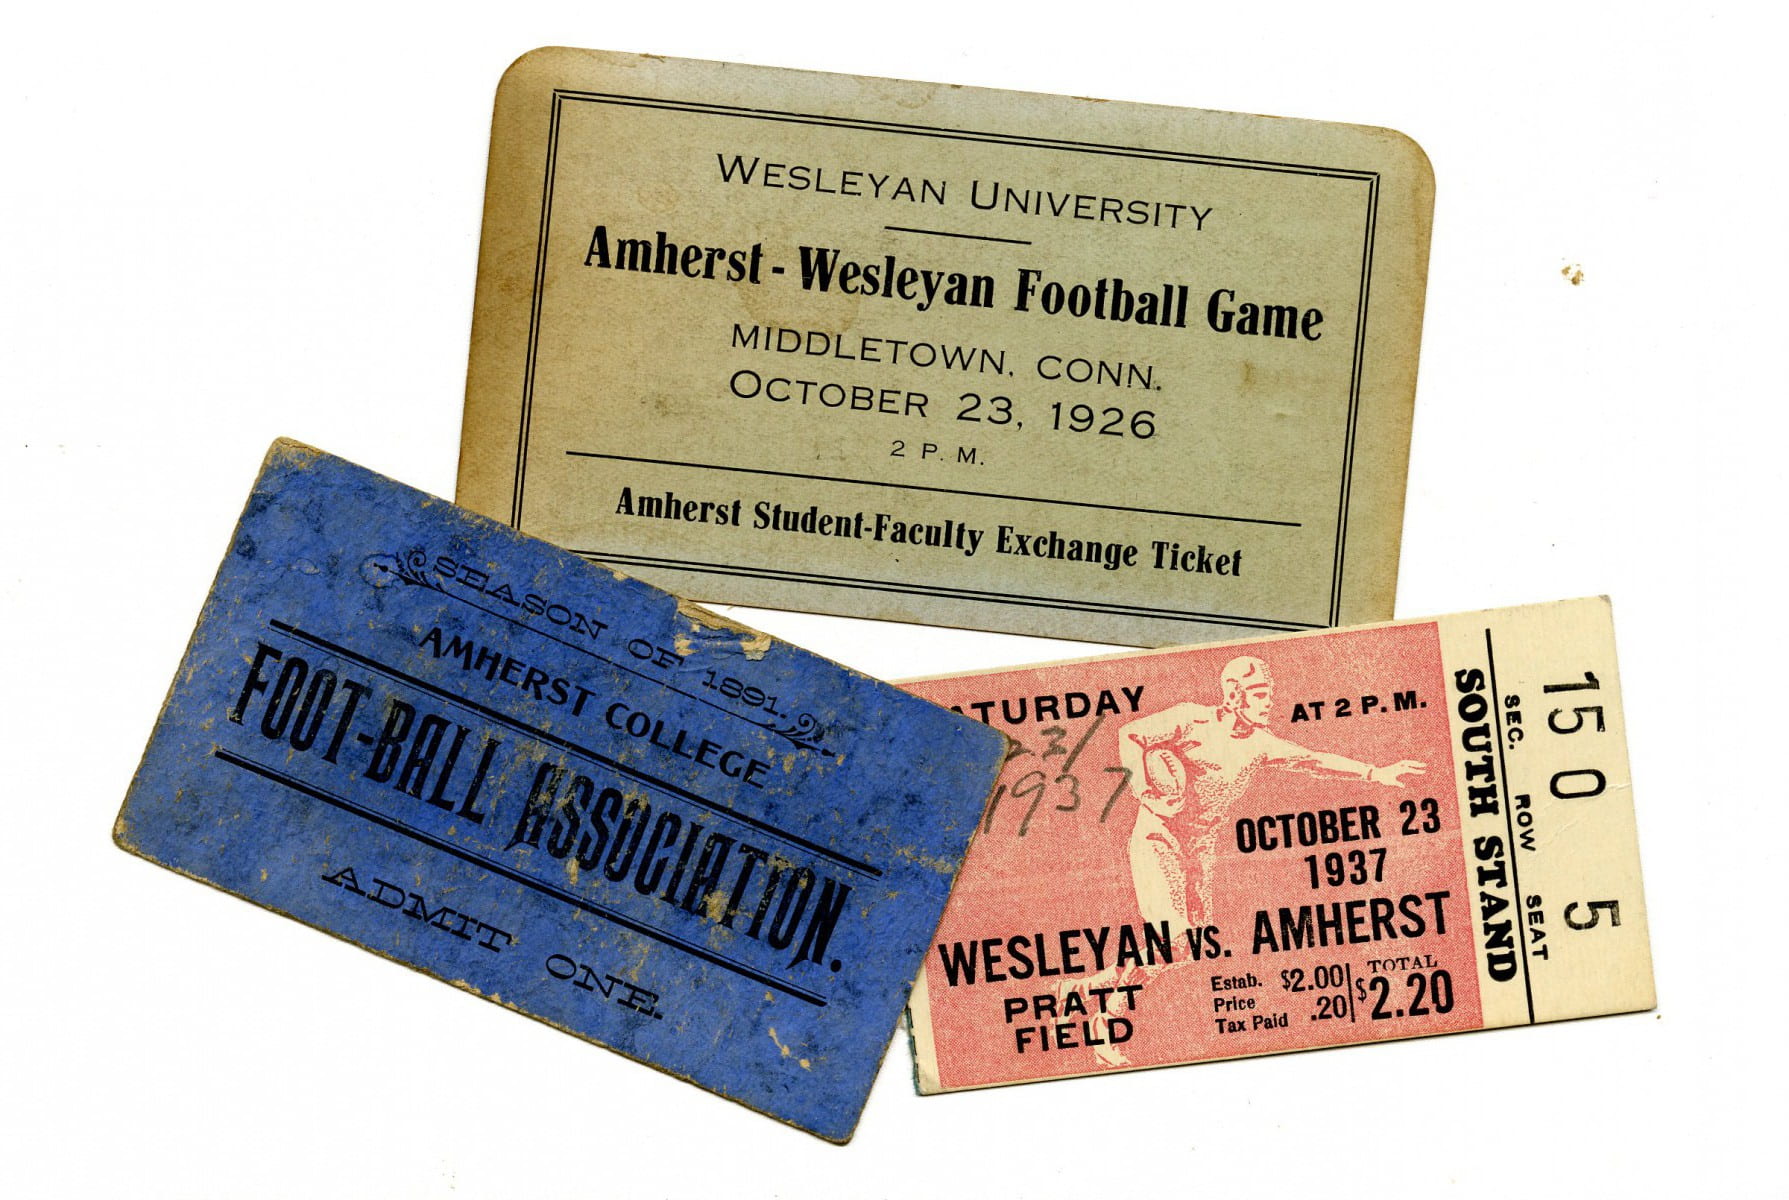 tickets from 1891, 1926 and 1937